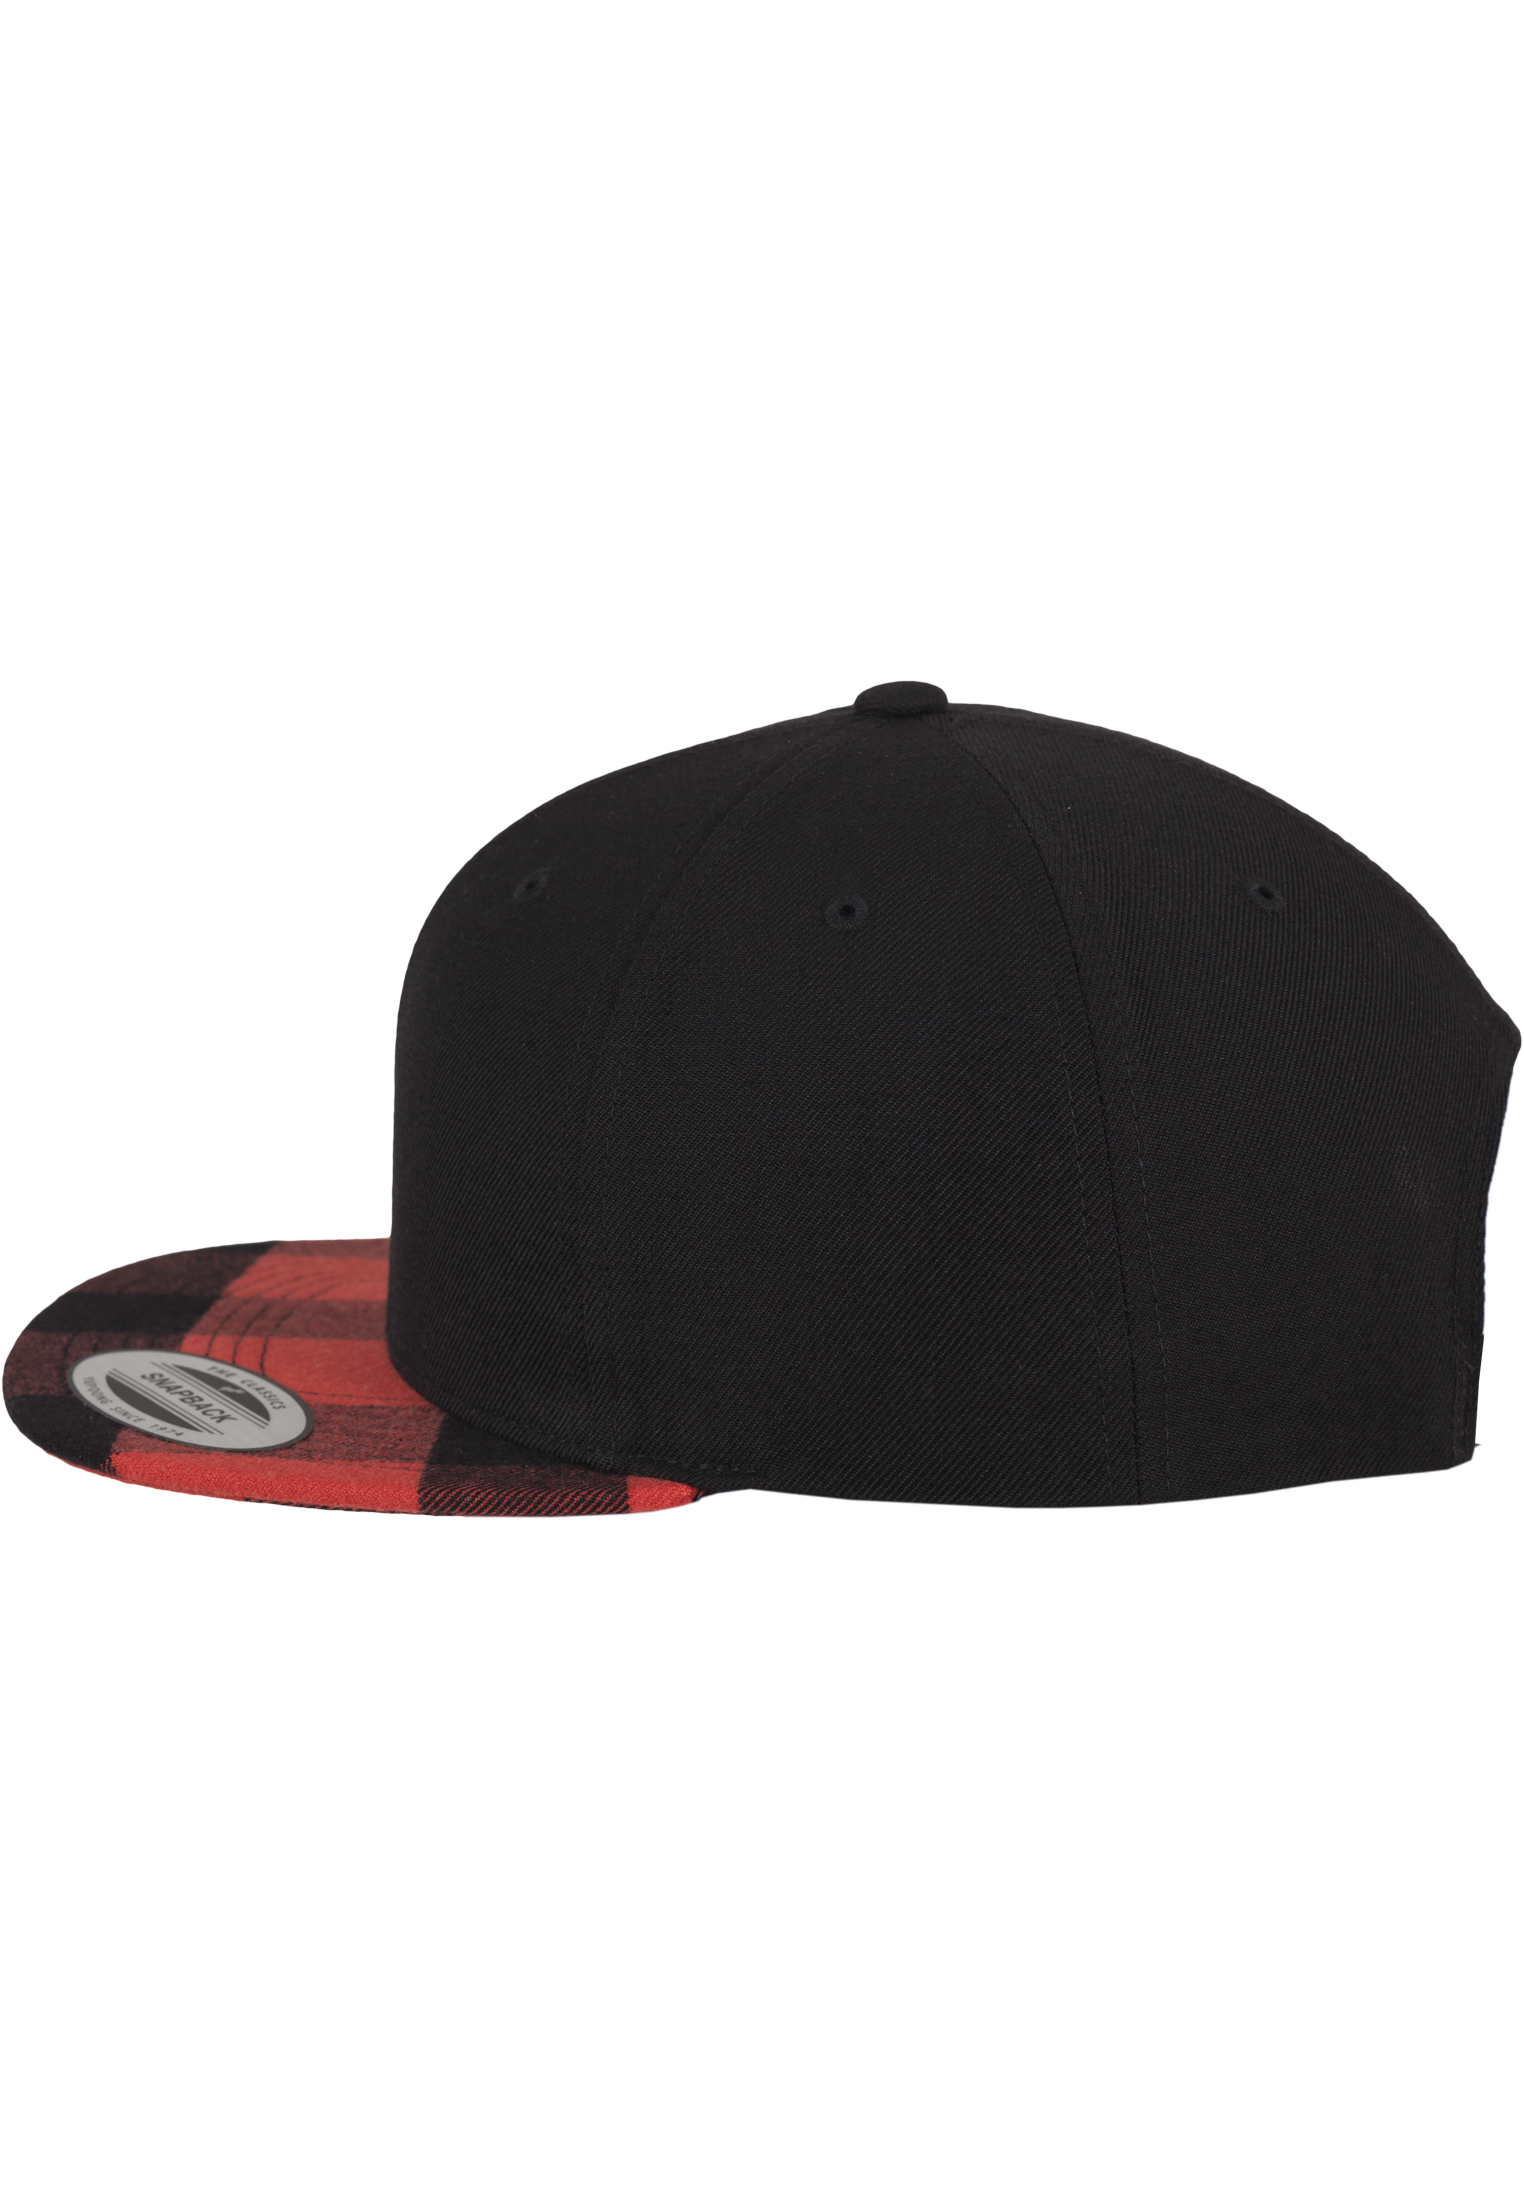 Snapback Checked Flanell Peak Snapback in Farbe blk/red